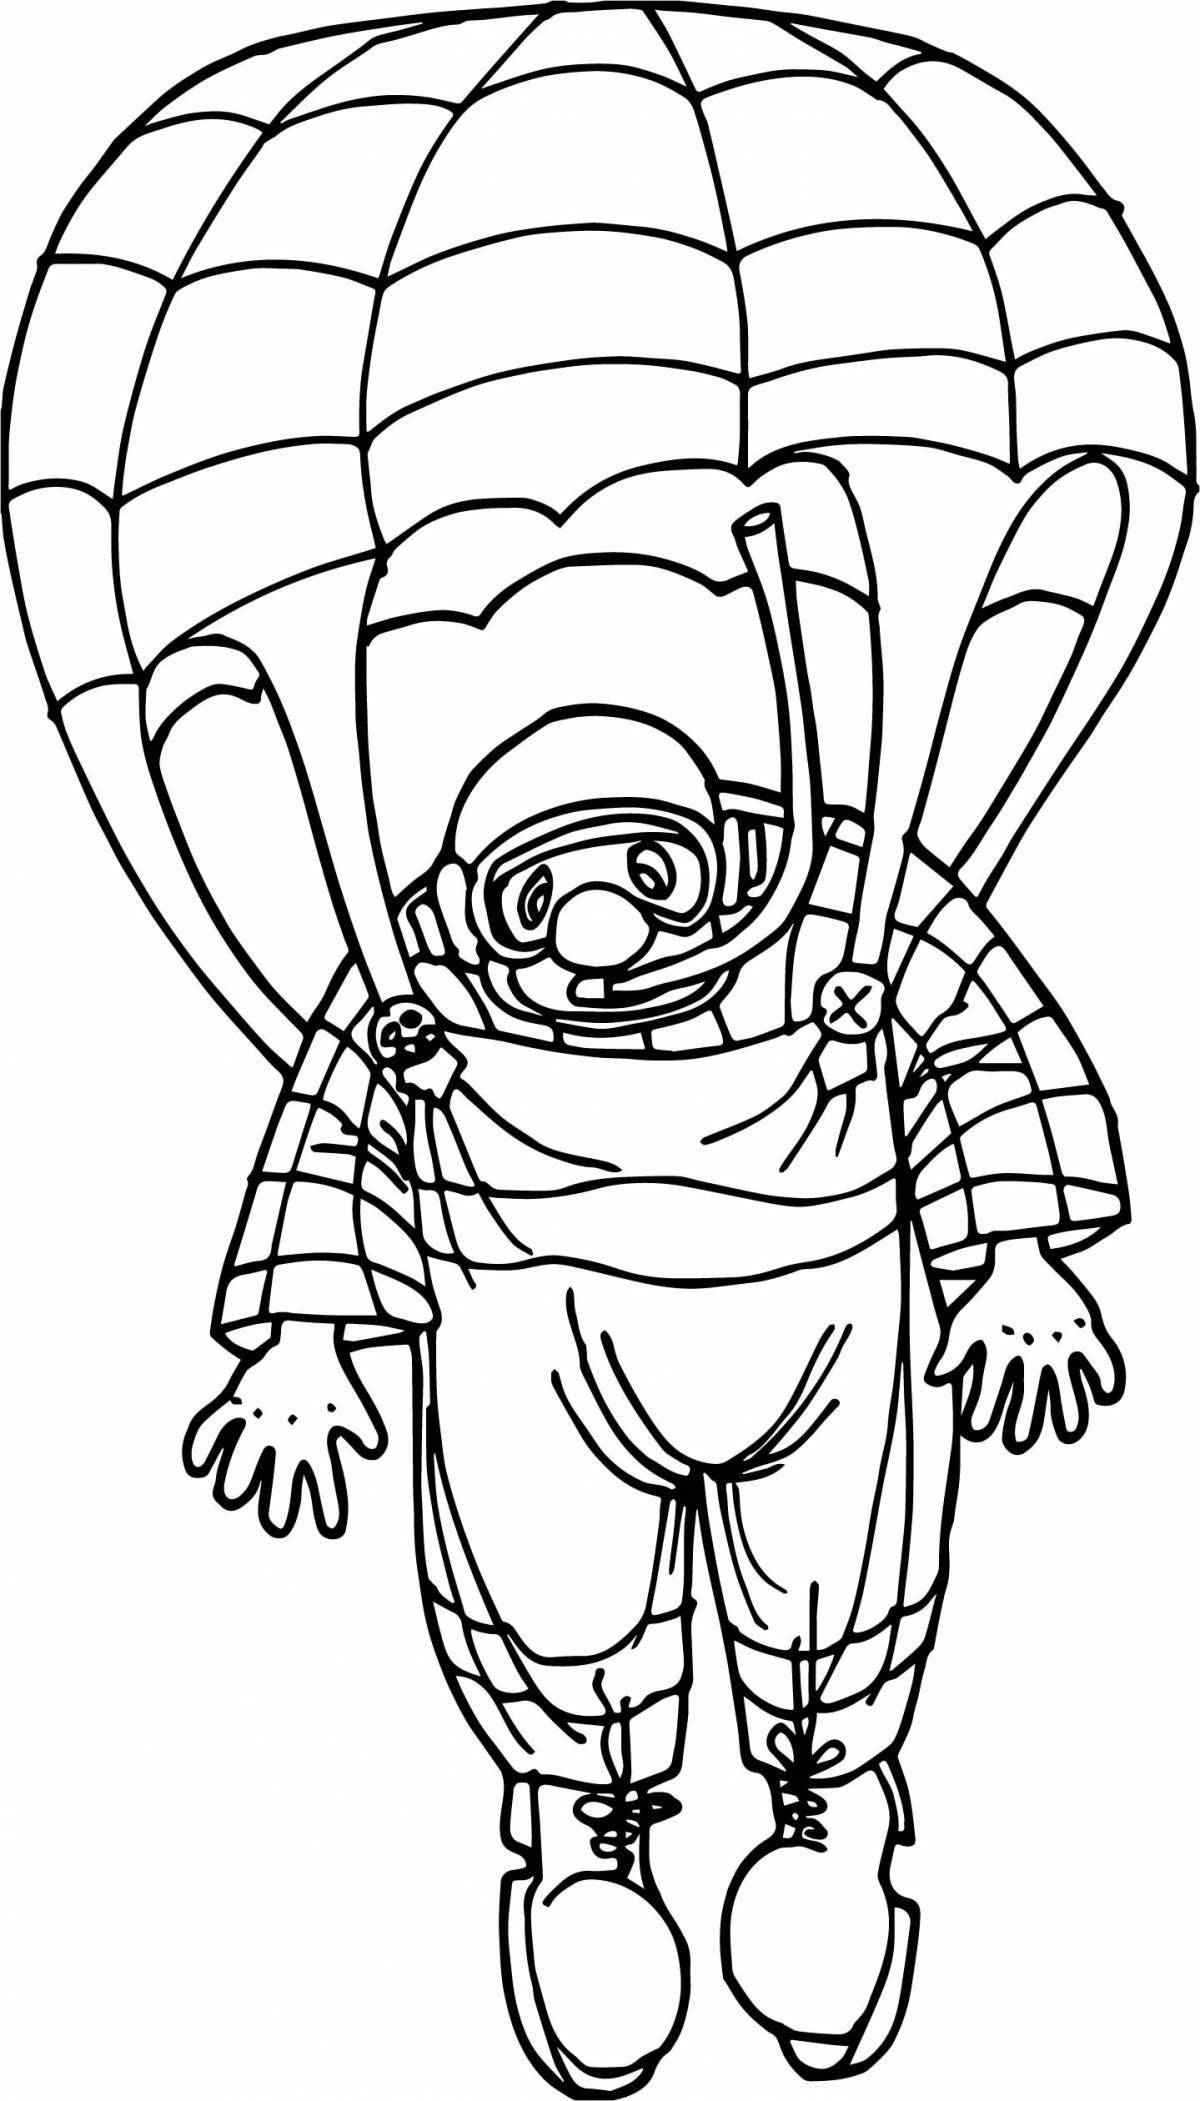 A fun military paratrooper coloring book for kids